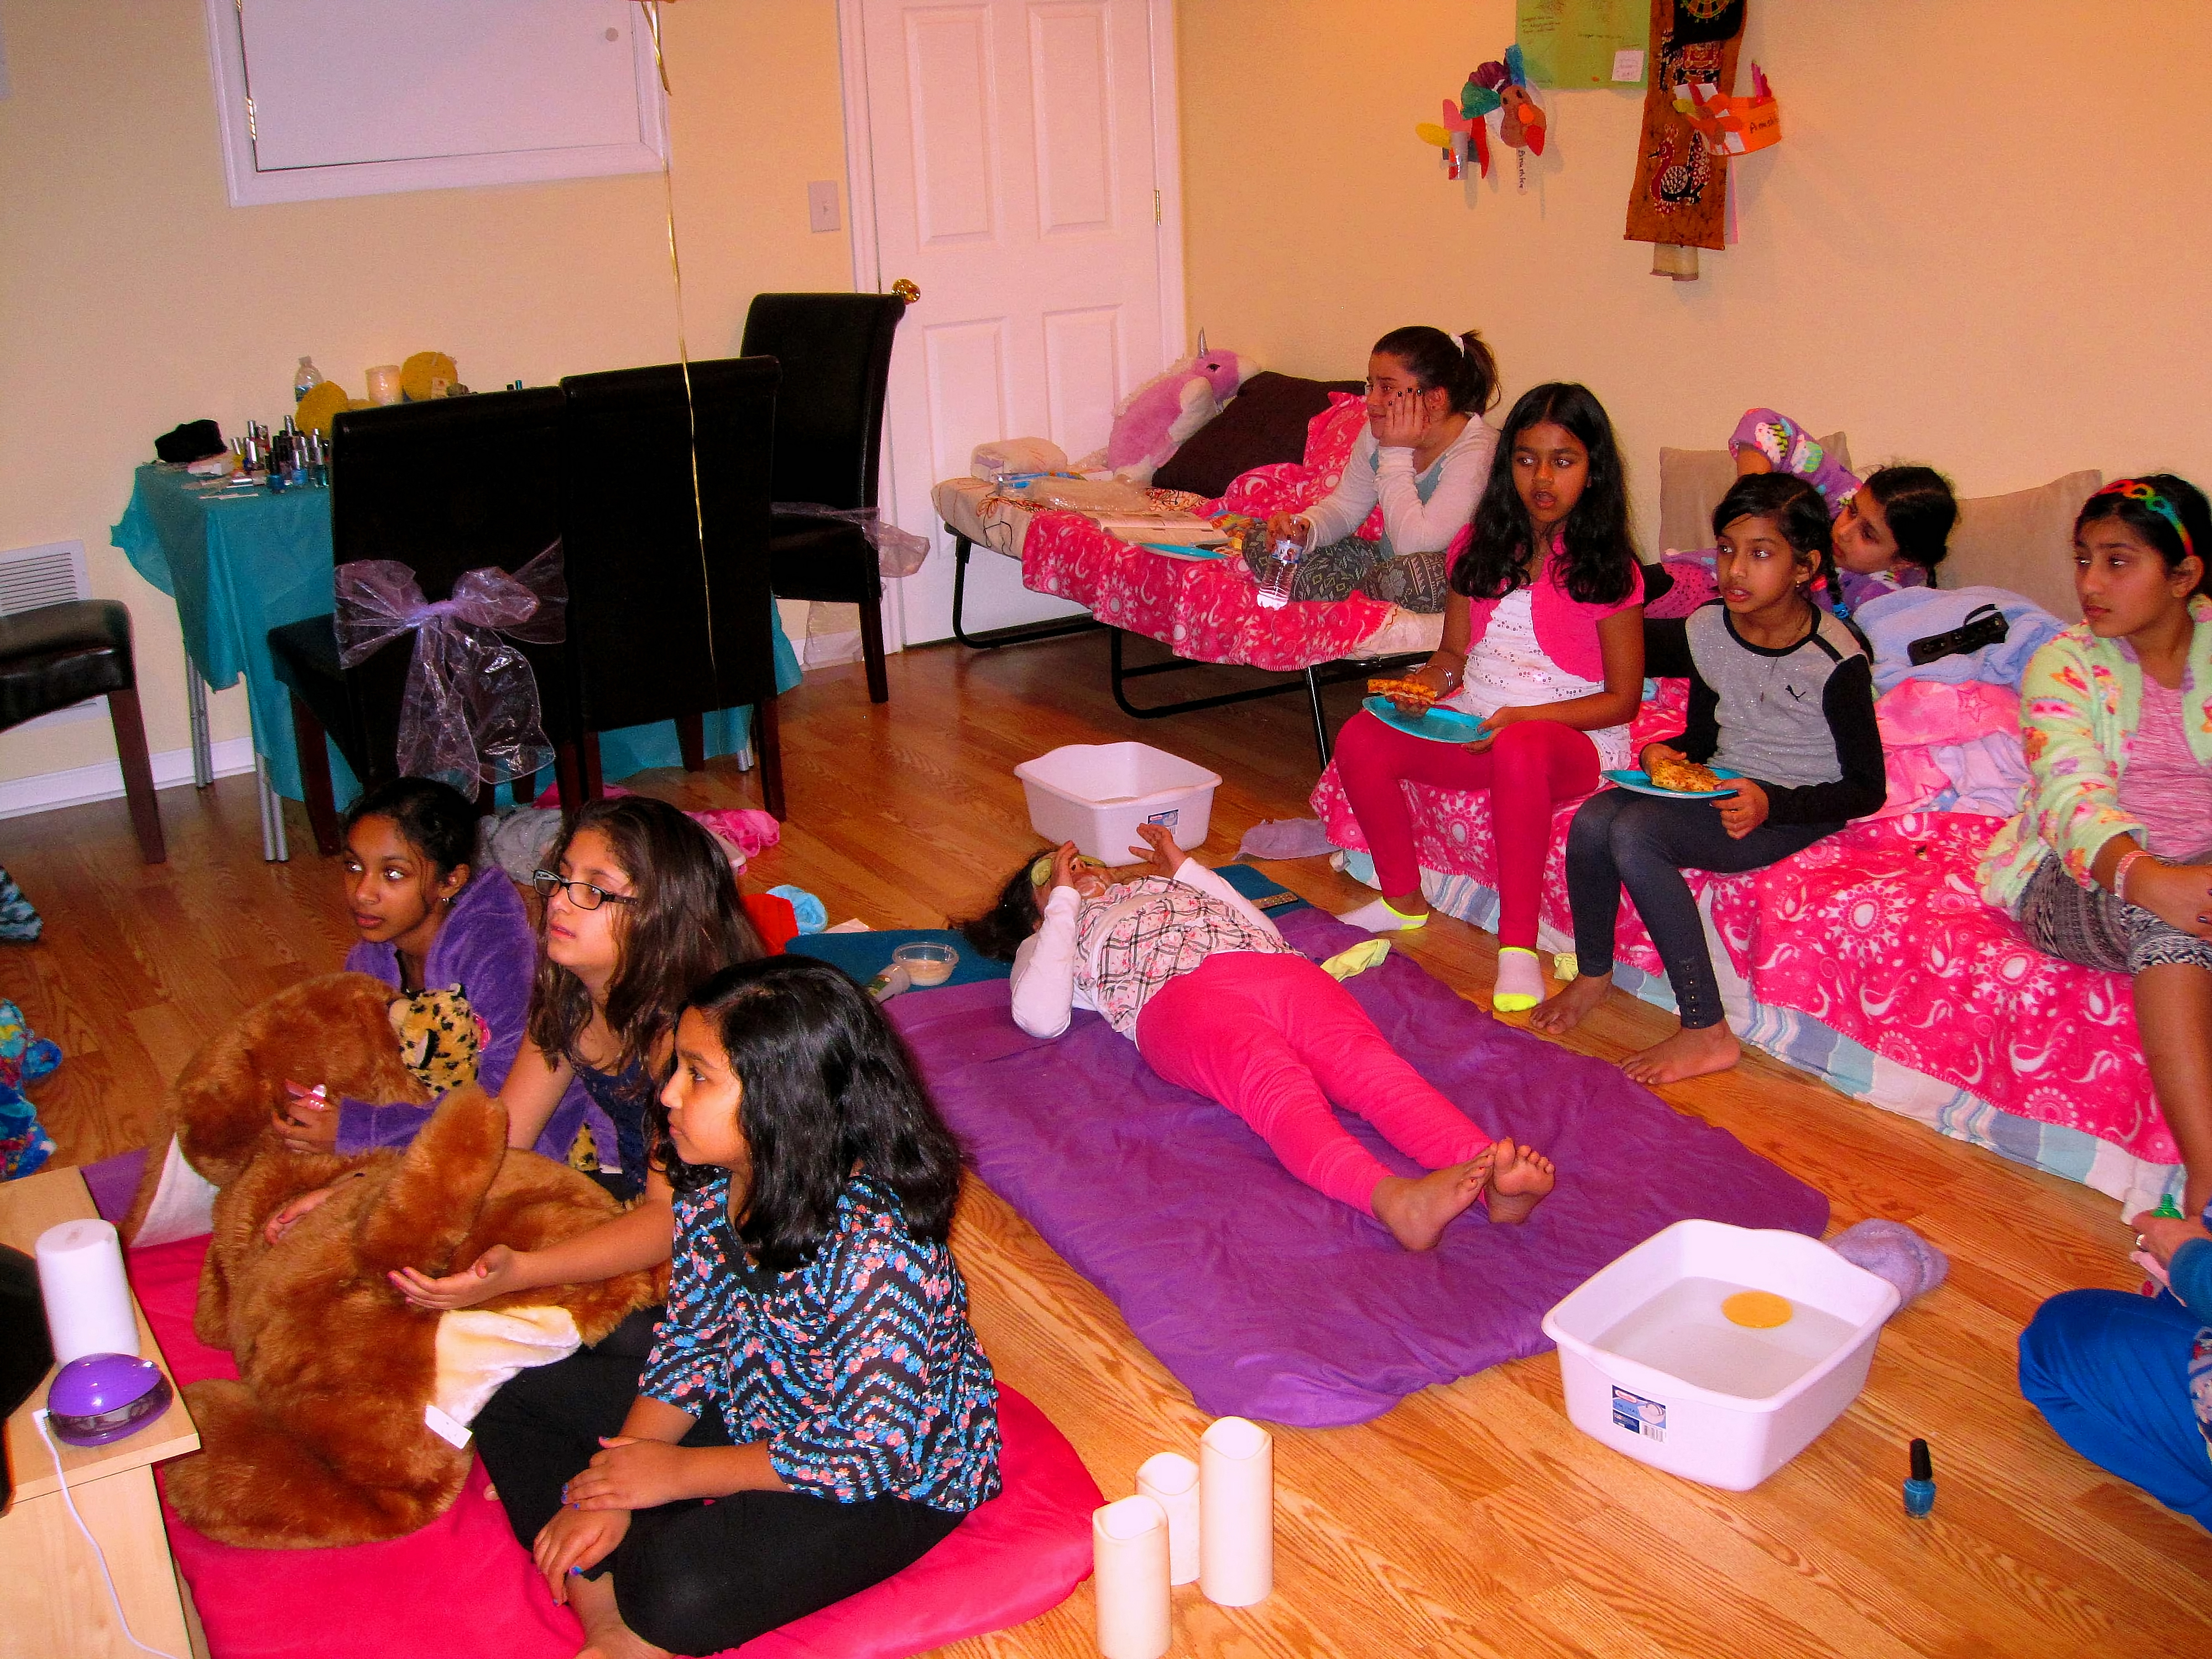 Everyone's Hanging Out During The Spa Party For Girls 